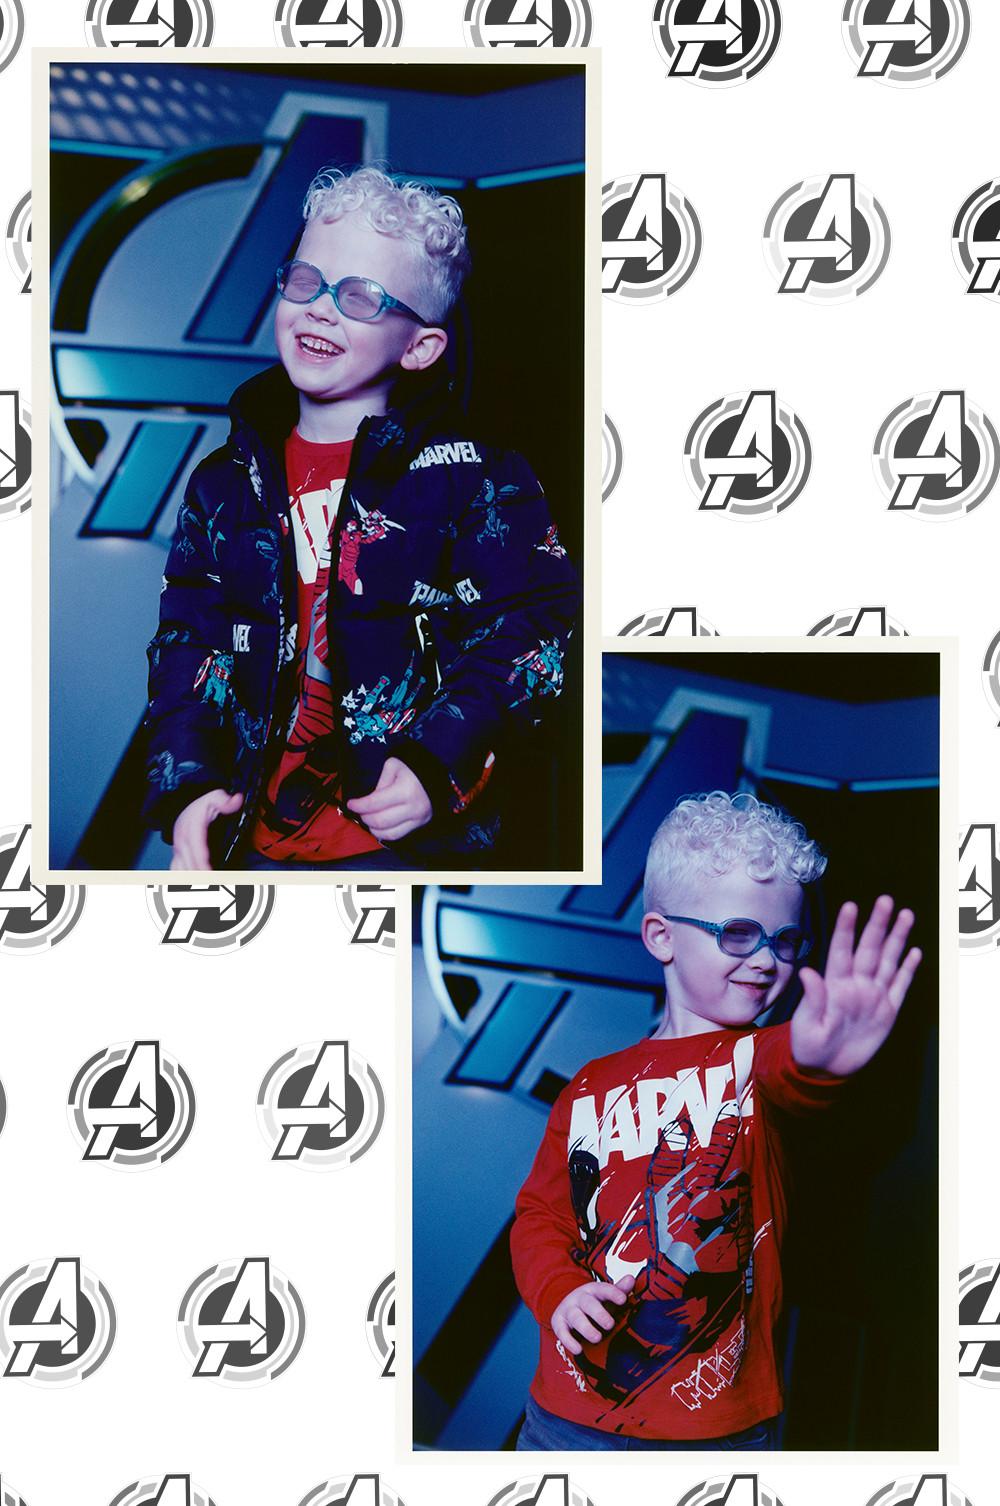 Child wearing a Marvel top and jacket